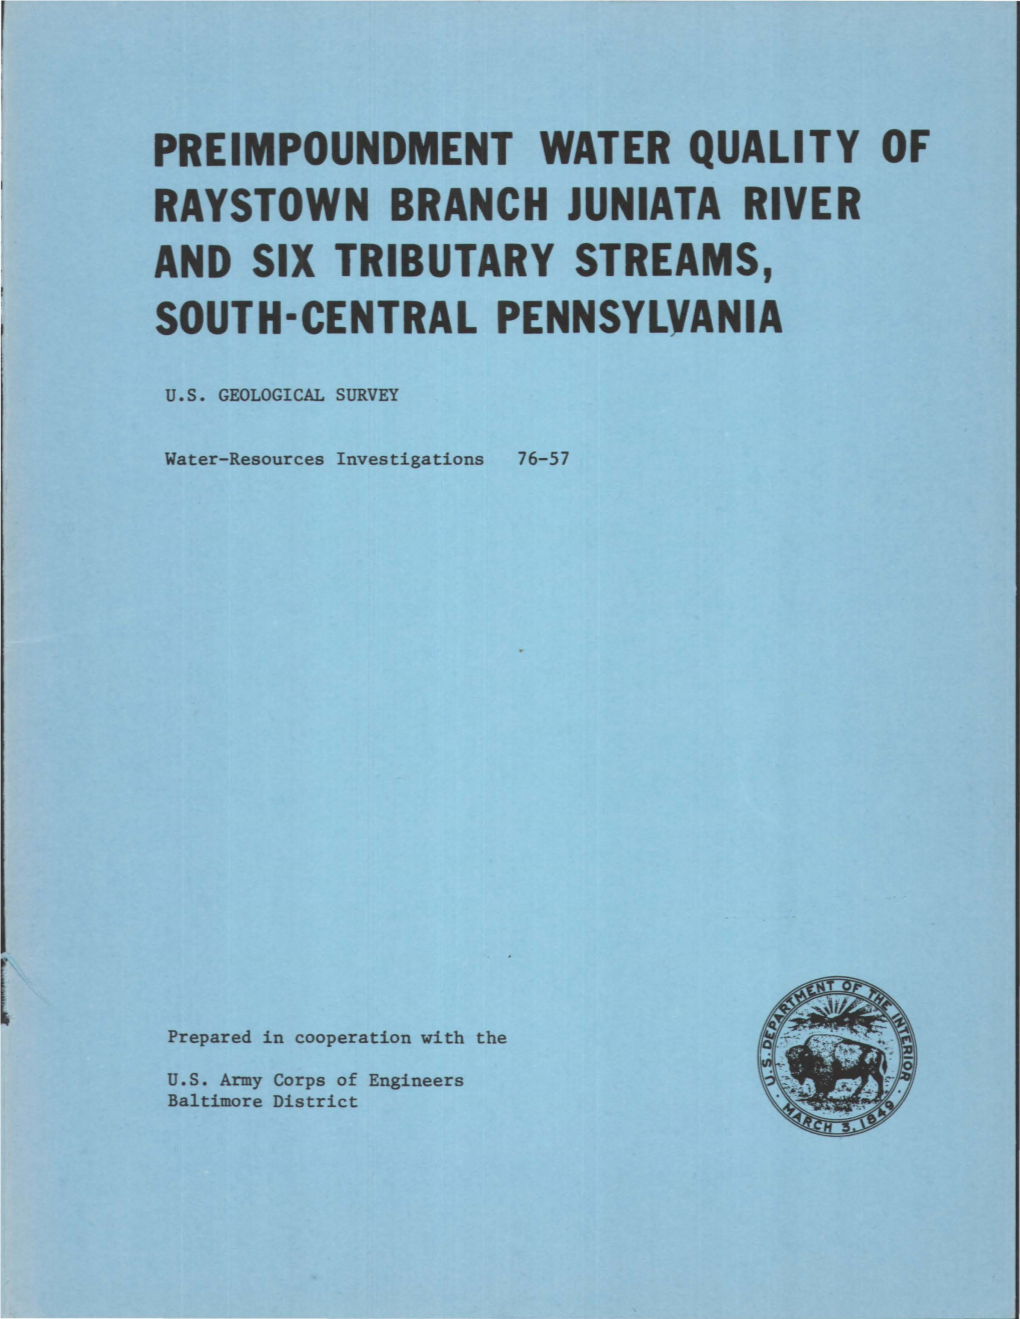 Preimpoundment Water Quality of Raystown Branch Juniata River and Six Tributary Streams, South-Central Pennsylvania